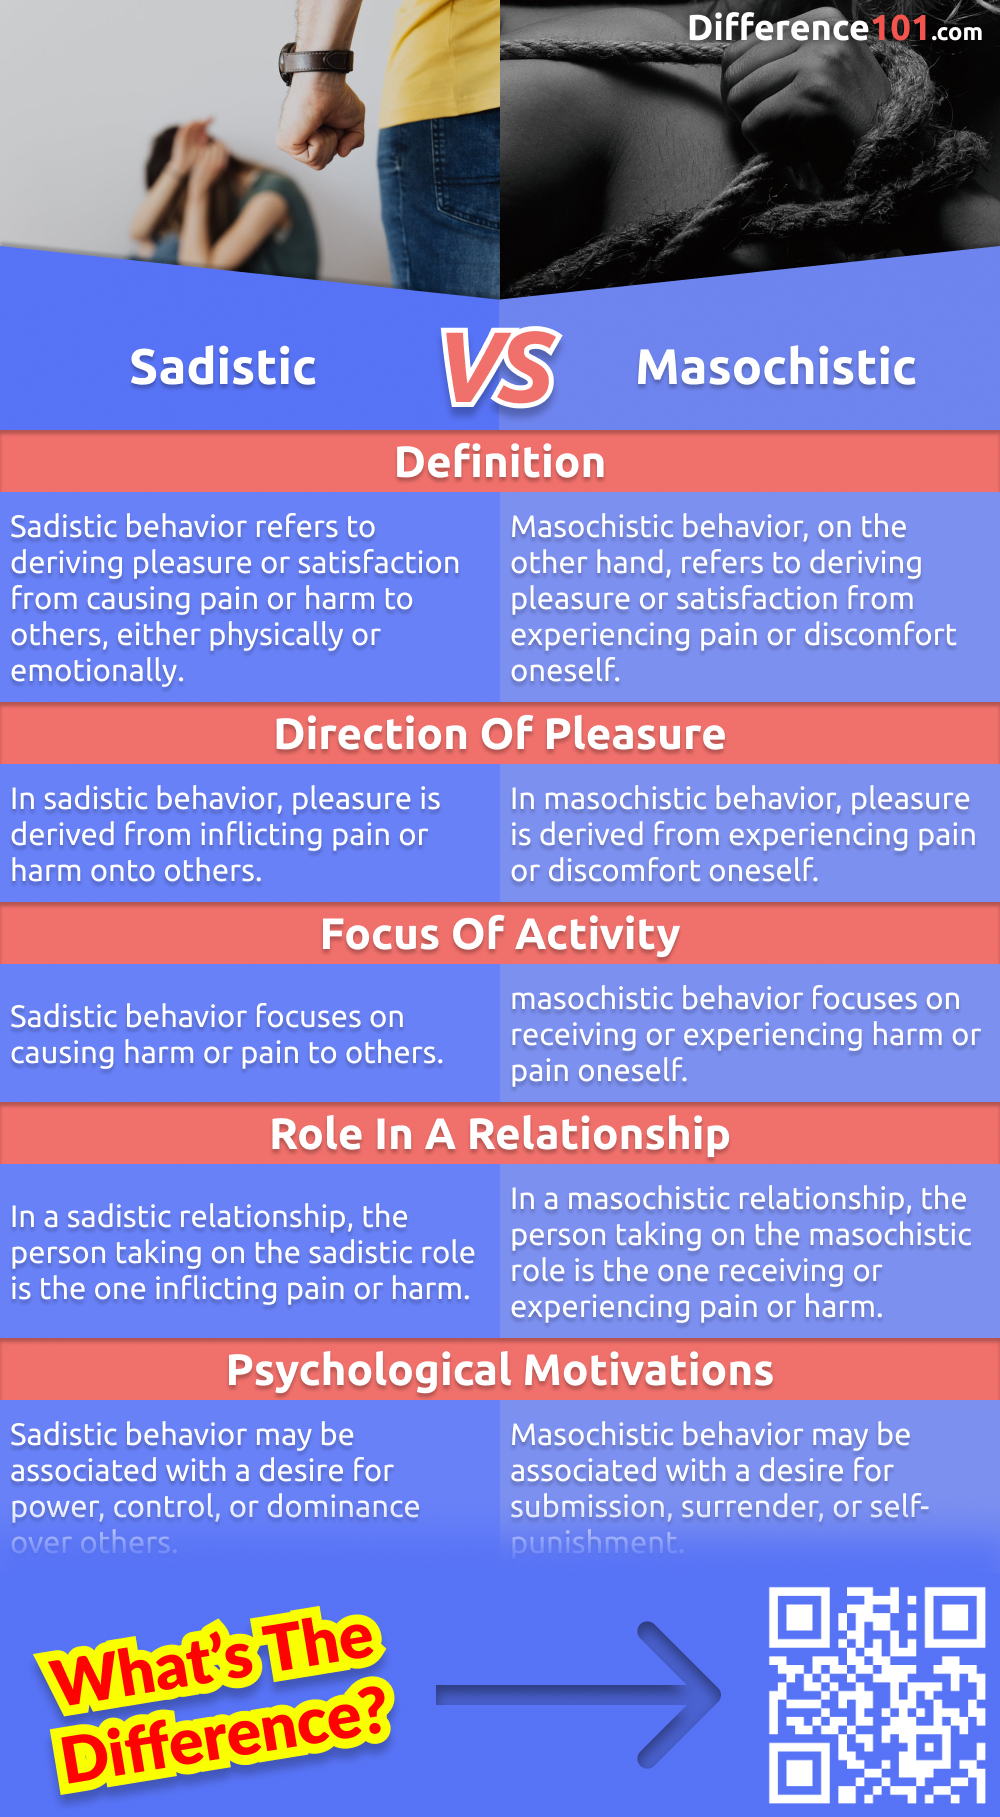 What's the difference between sadistic and masochistic? Both terms refer to enjoying pain, but there are some key distinctions. Read more to learn about differences, pros and cons of each term.